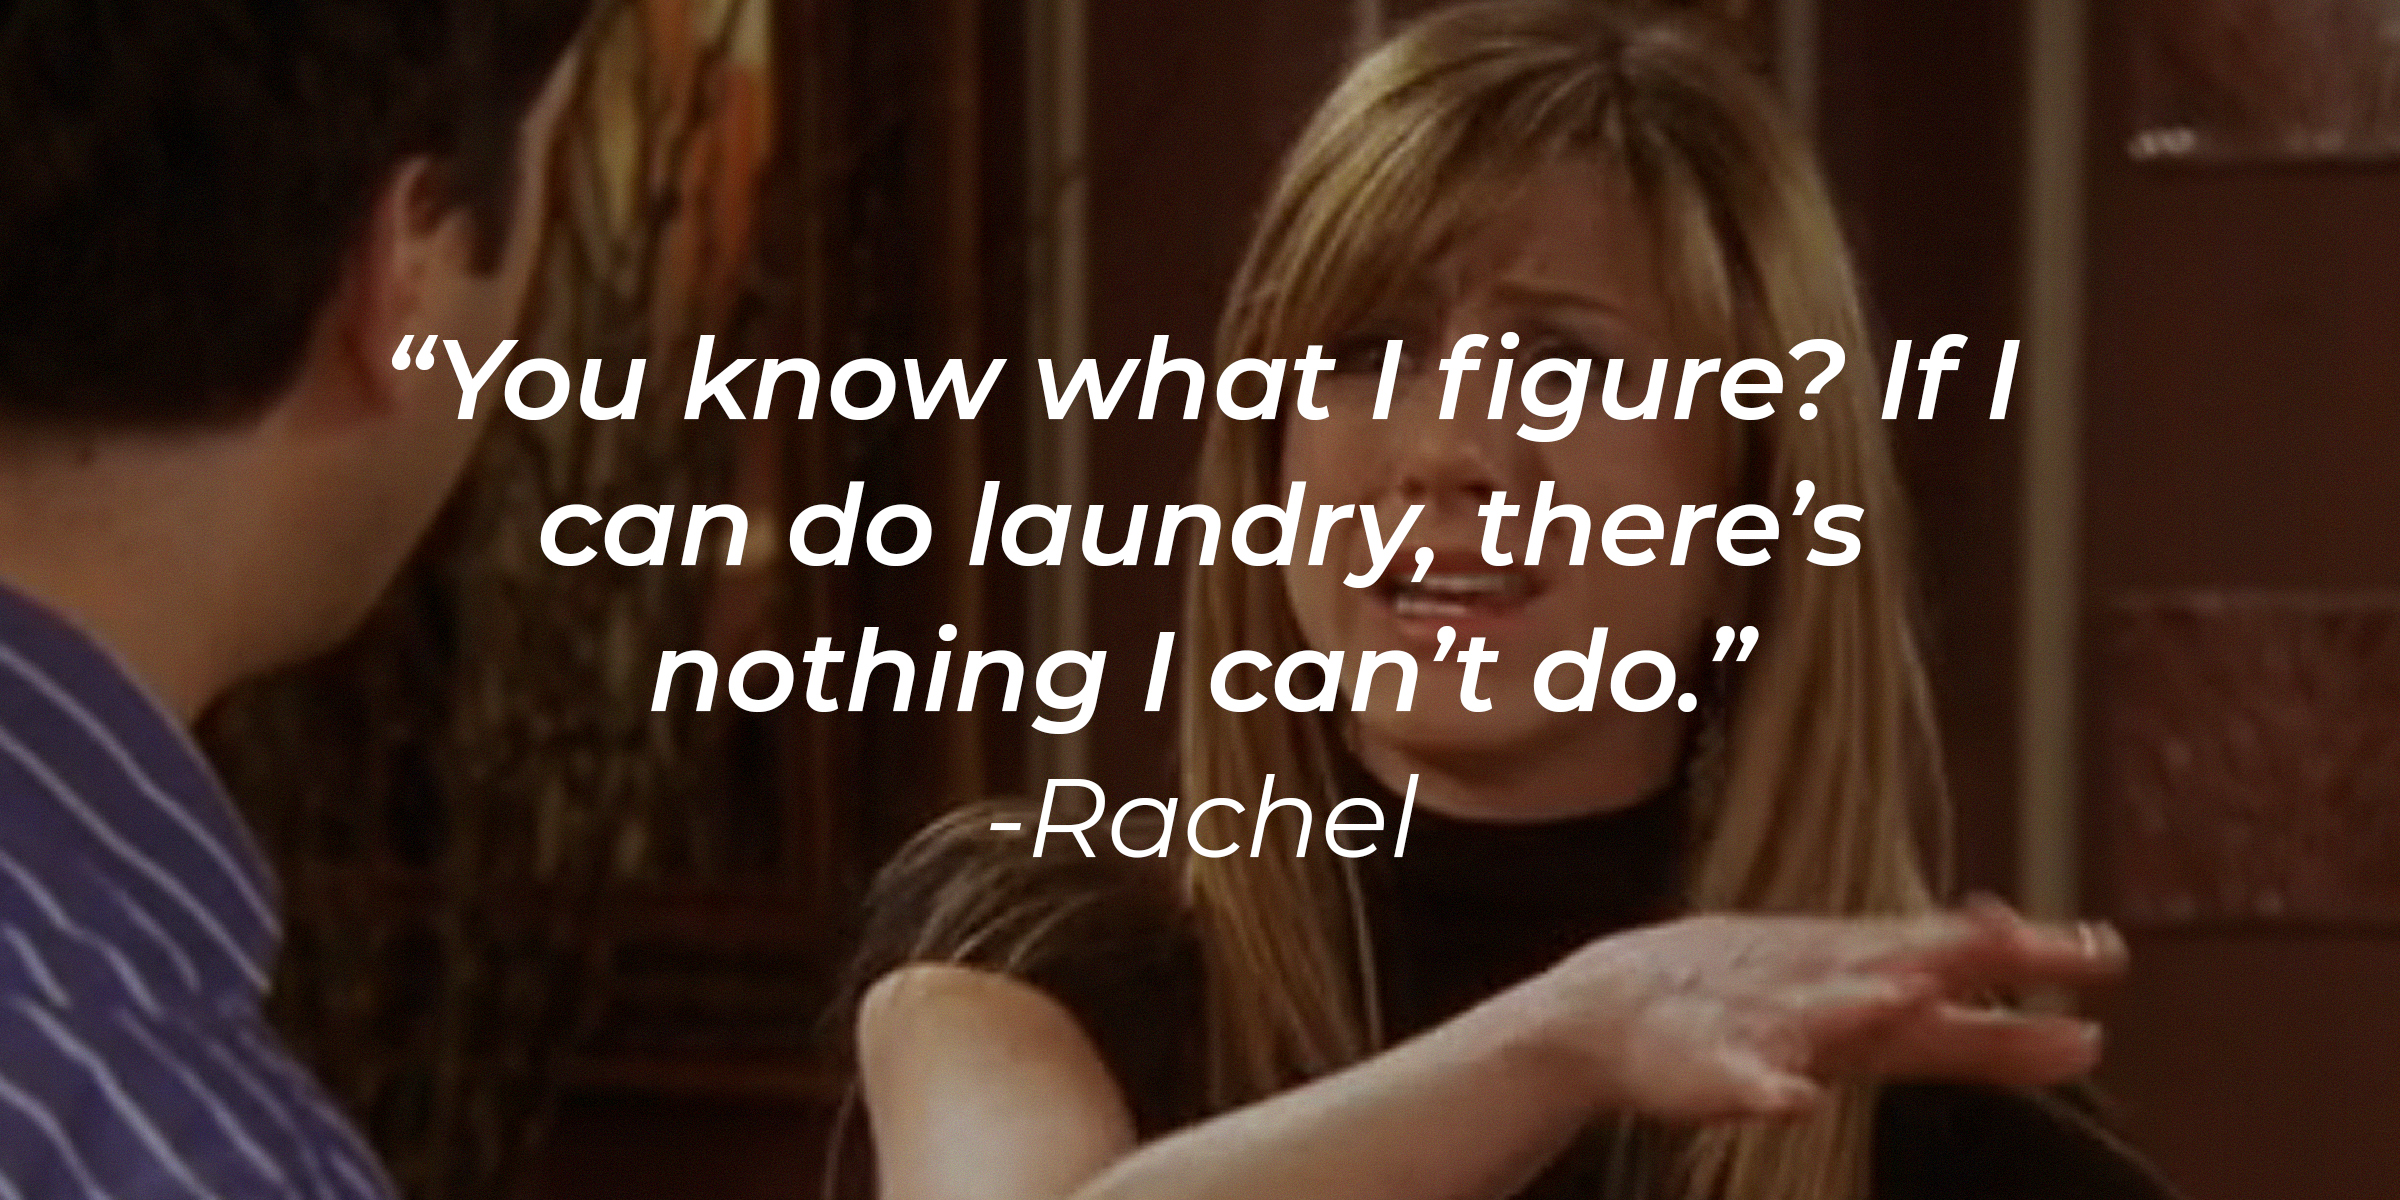 A photo Rachel with Rachel's quote: “You know what I figure? If I can do laundry, there’s nothing I can’t do.” | Source: facebook.com/friends.tv